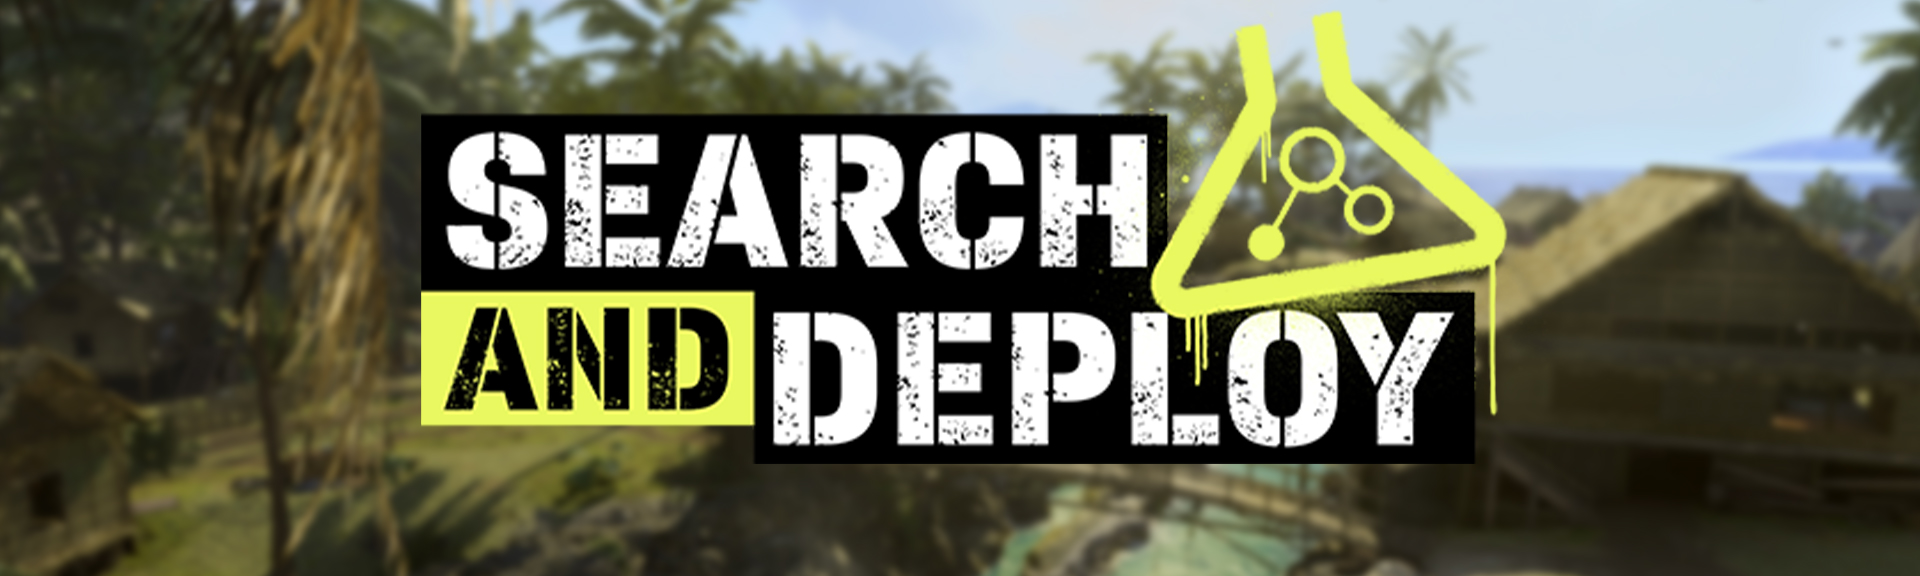 Search and Deploy Event Banner